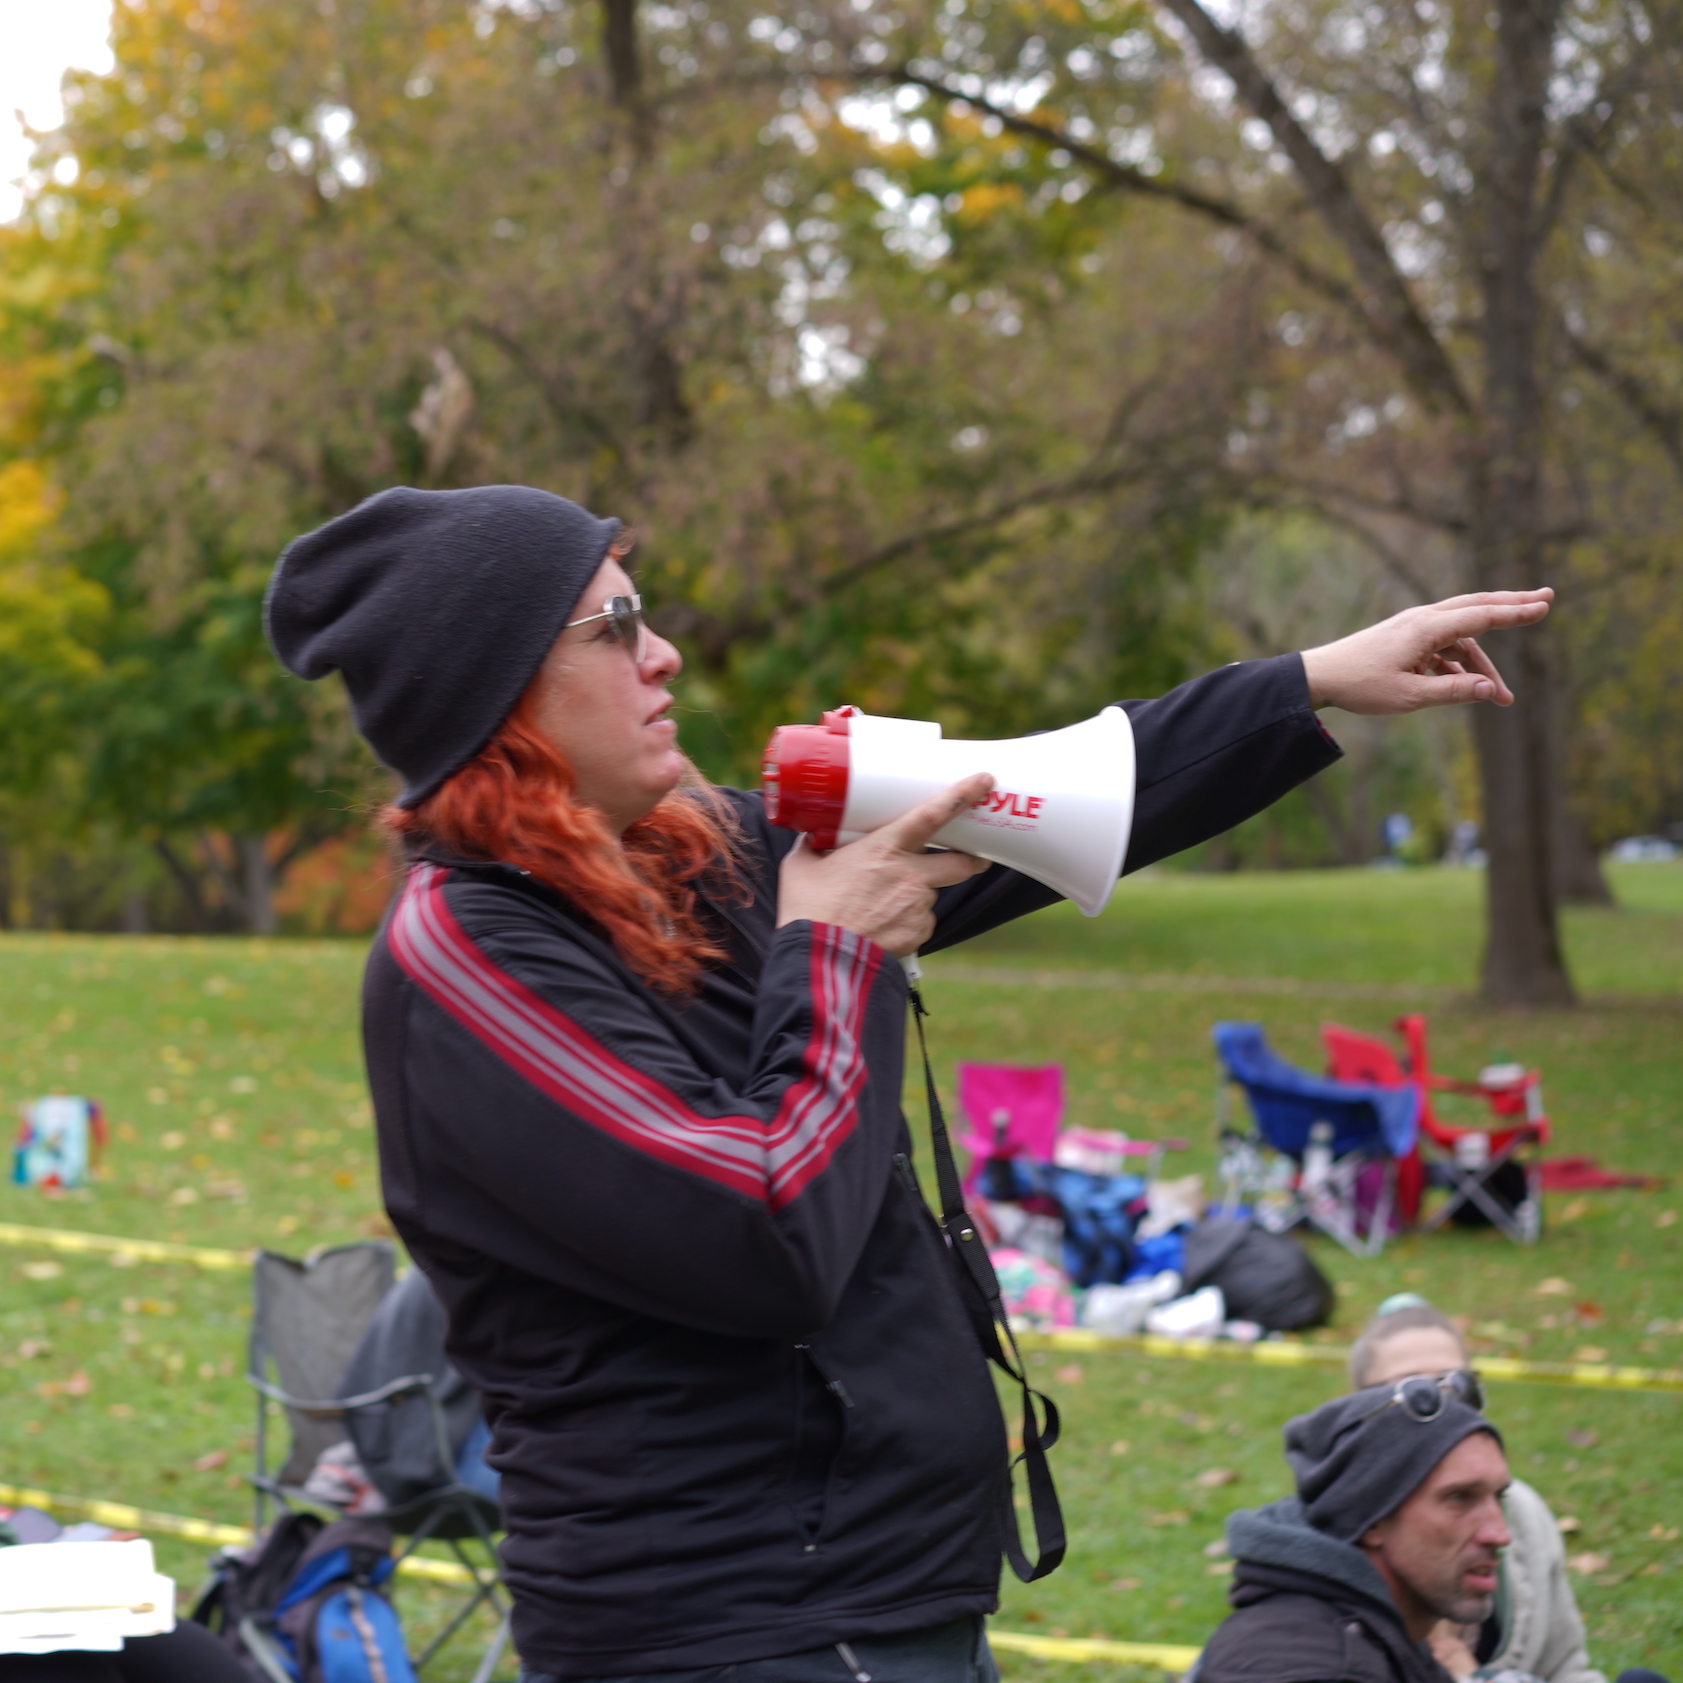 A woman in a park speaking into a megaphone and pointing, with people in the background.